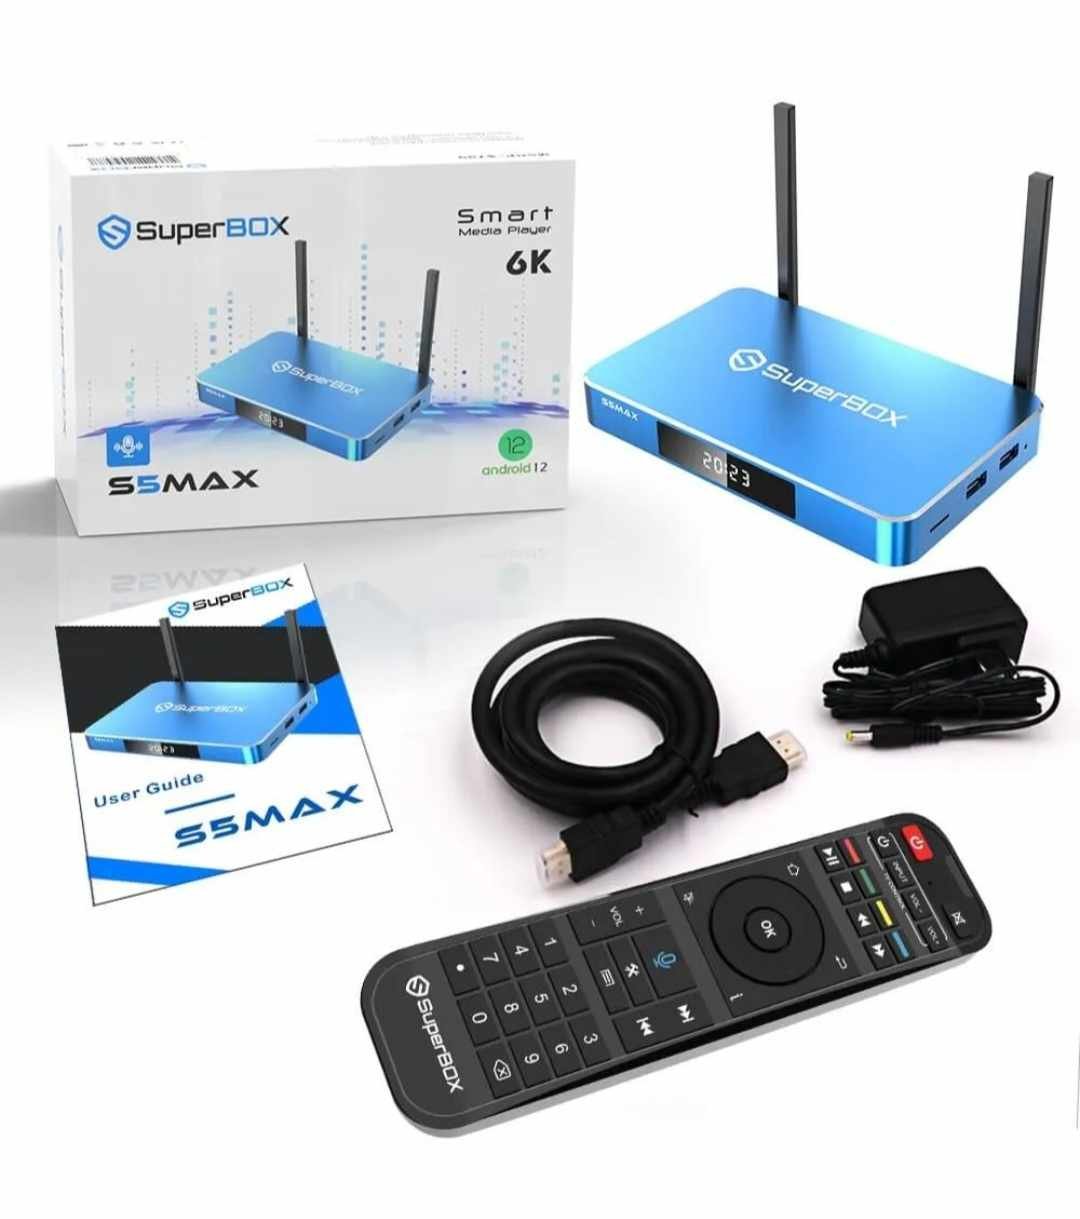 Superbox TV streaming box. This is the S5 Max model.